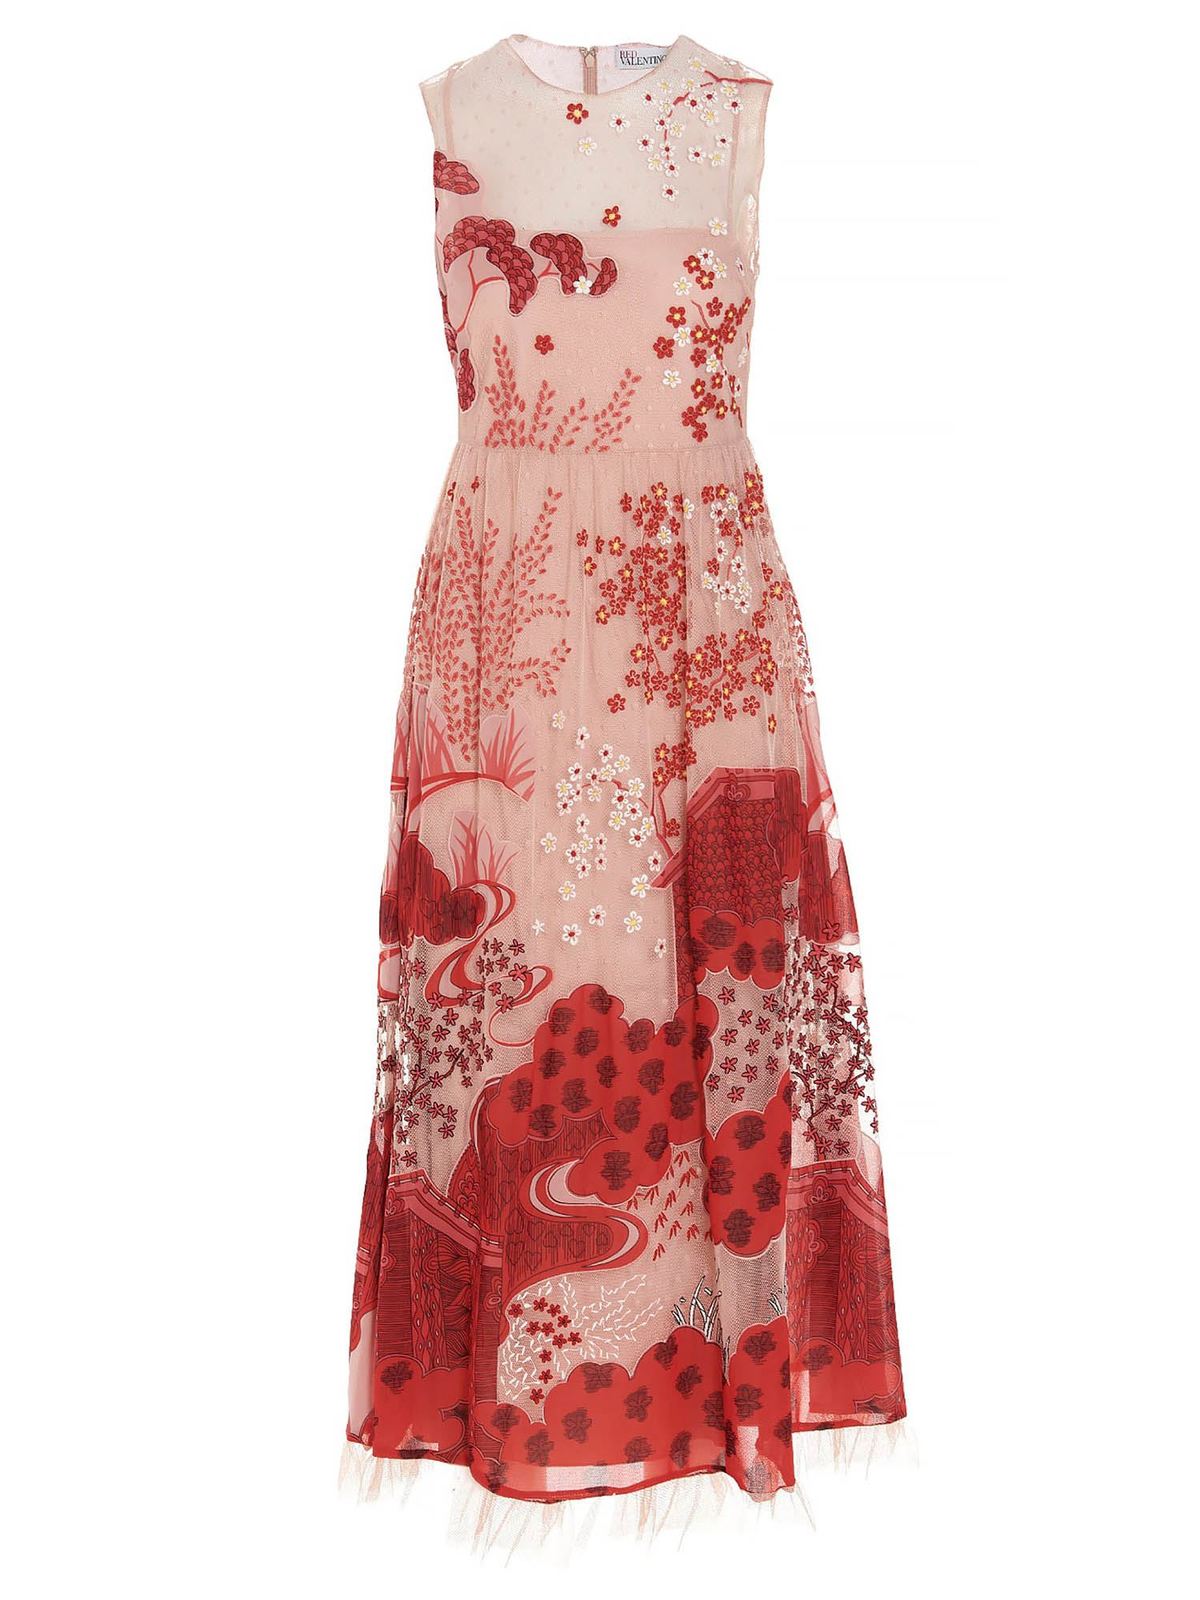 RED VALENTINO ORIENTAL TOILE DE JOUY PRINT DRESS IN RED